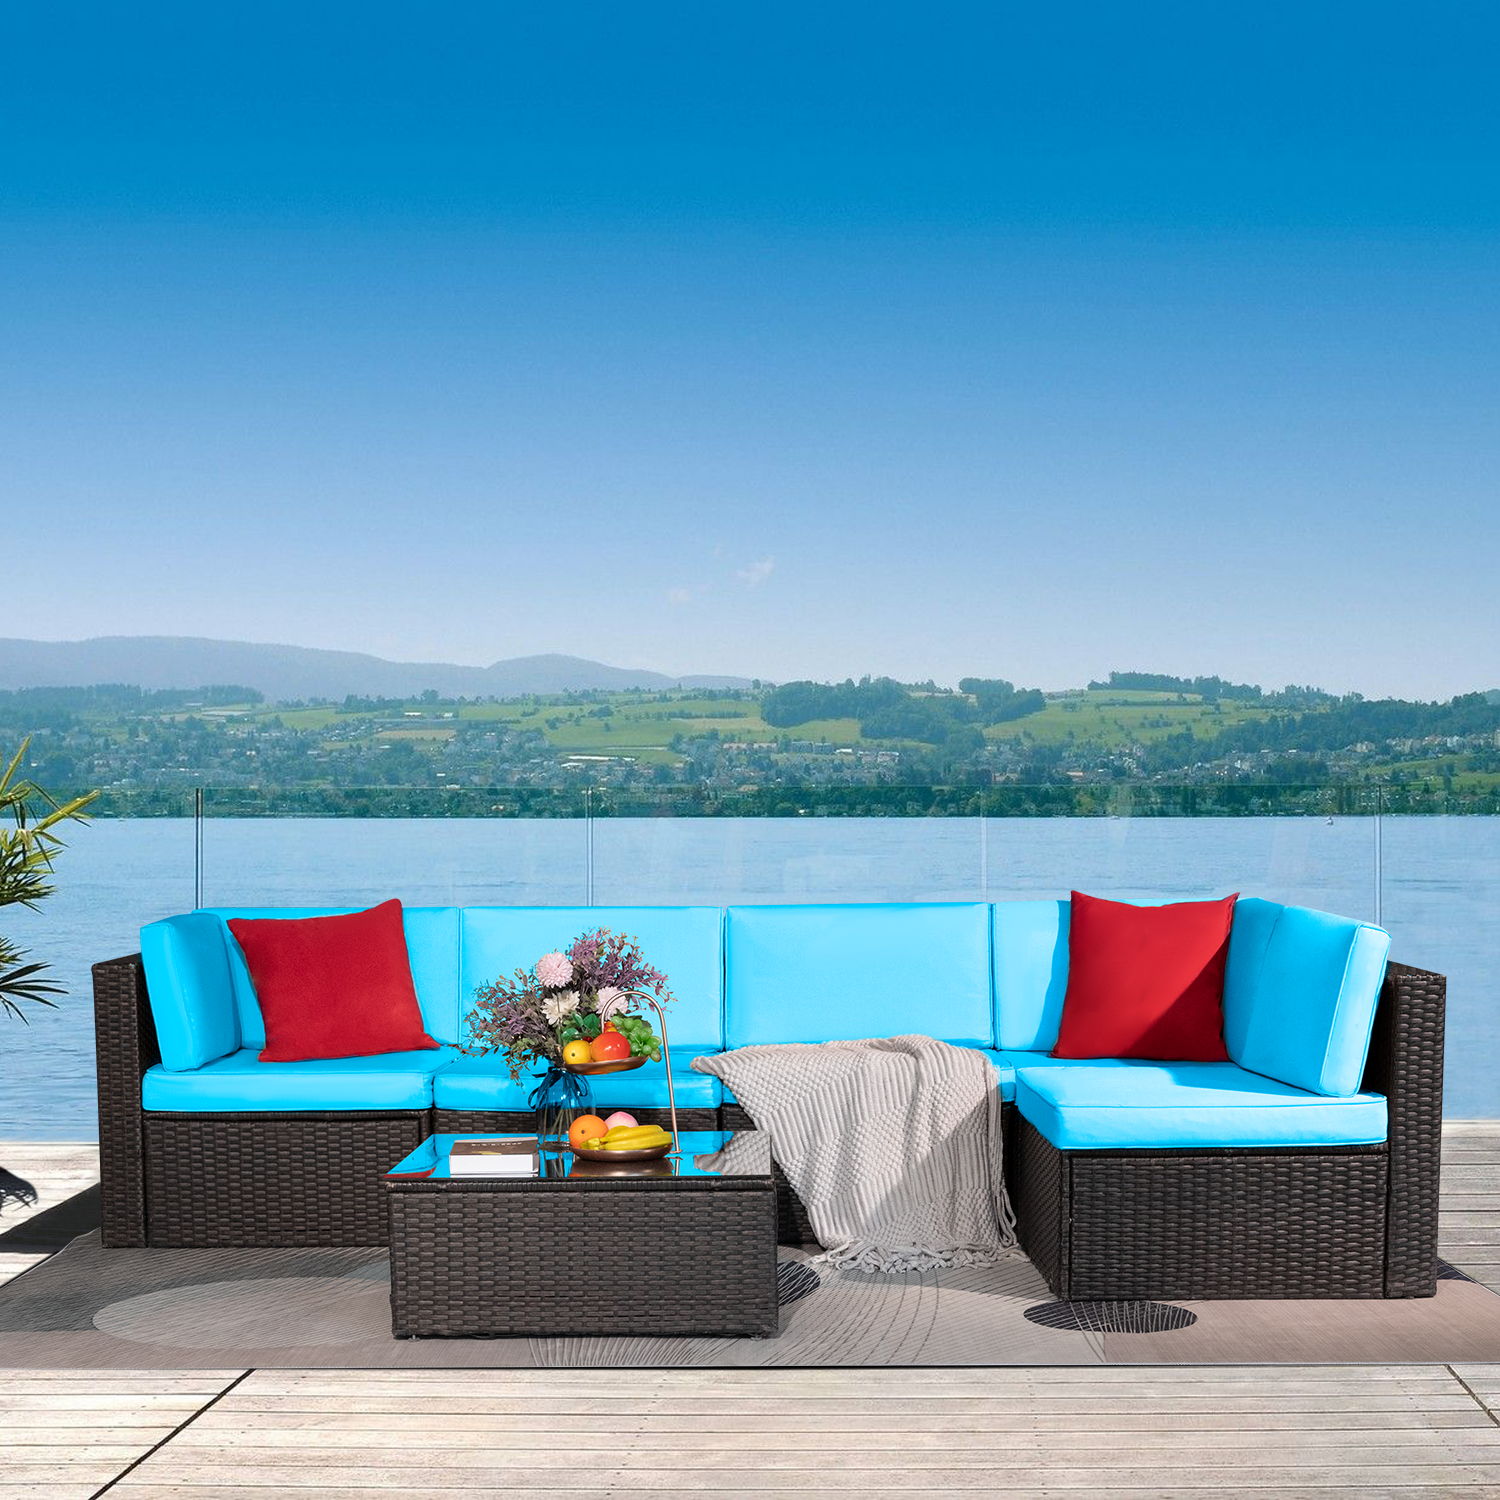 Lacoo 6 Pieces Outdoor Indoor Sectional Sofa Set PE Wicker Rattan Sectional Seating Group with Cushions Blue - image 2 of 8